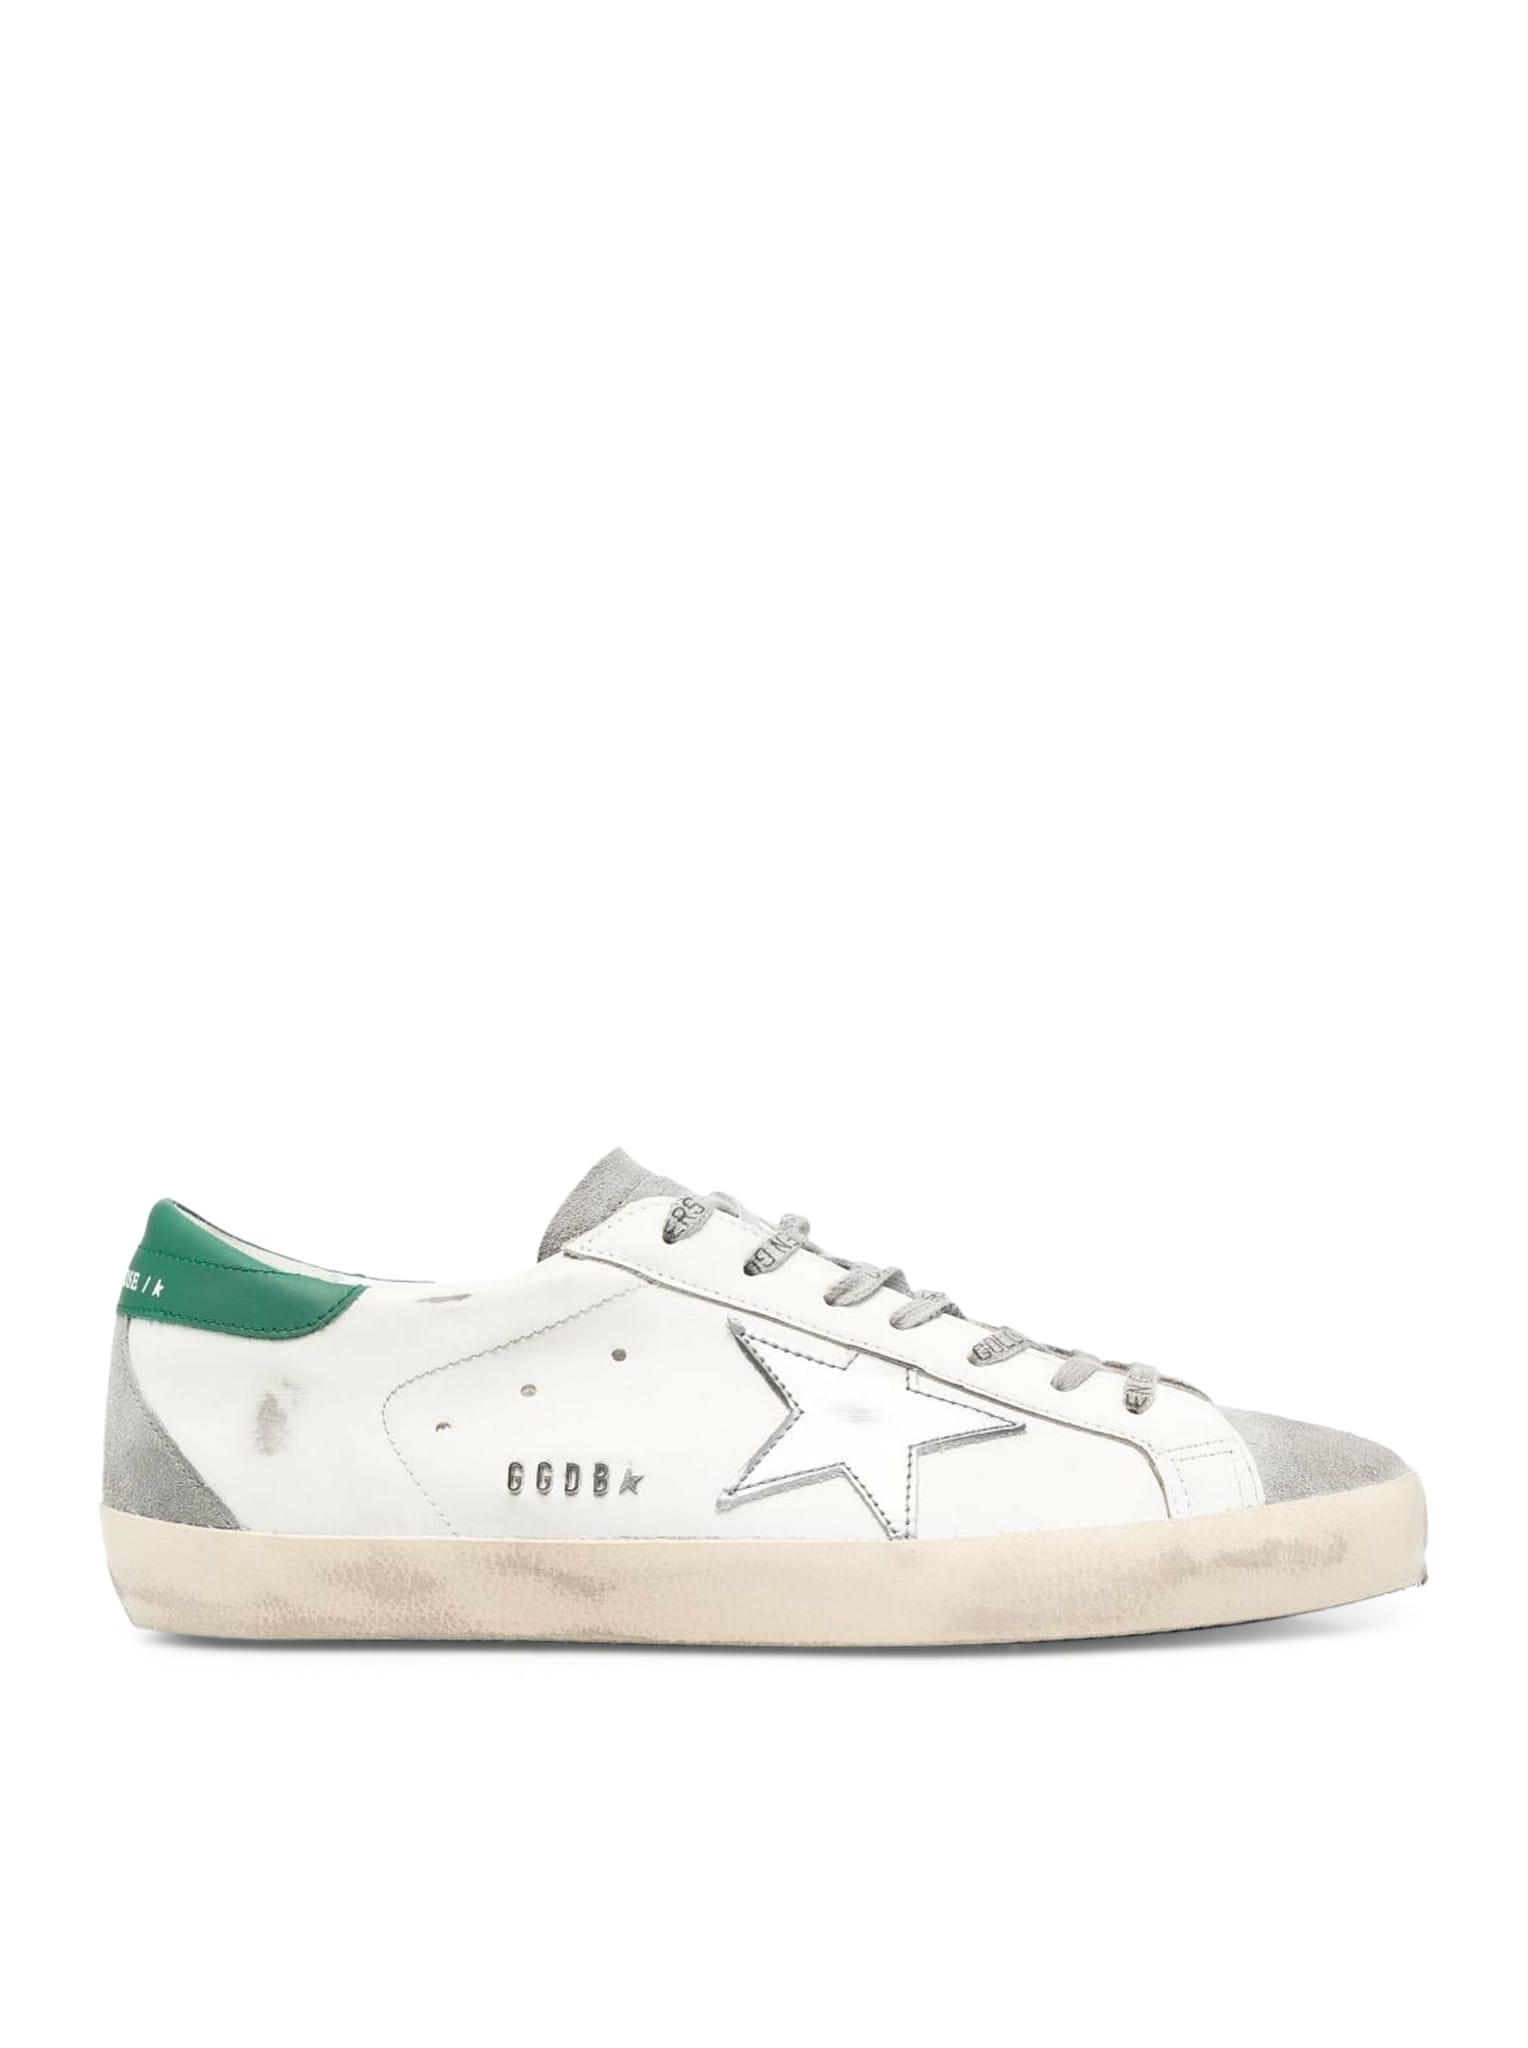 Shop Golden Goose Super-star Leather Upper And Heel Suede Toe And Spur Laminated Star Metal Lettering In White Grey Silver Green